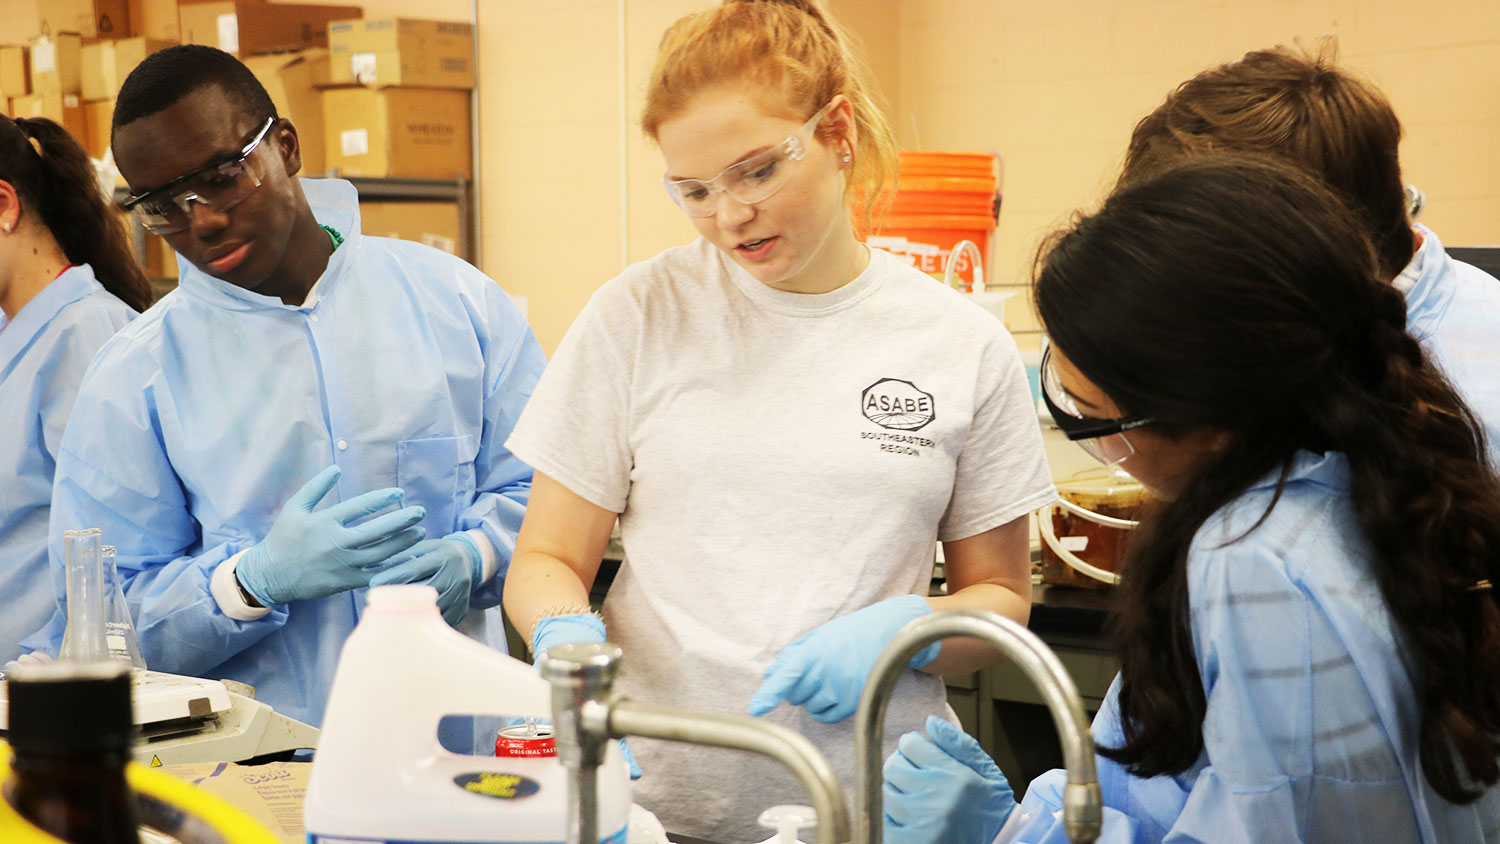 Female student working on an experiment with other students